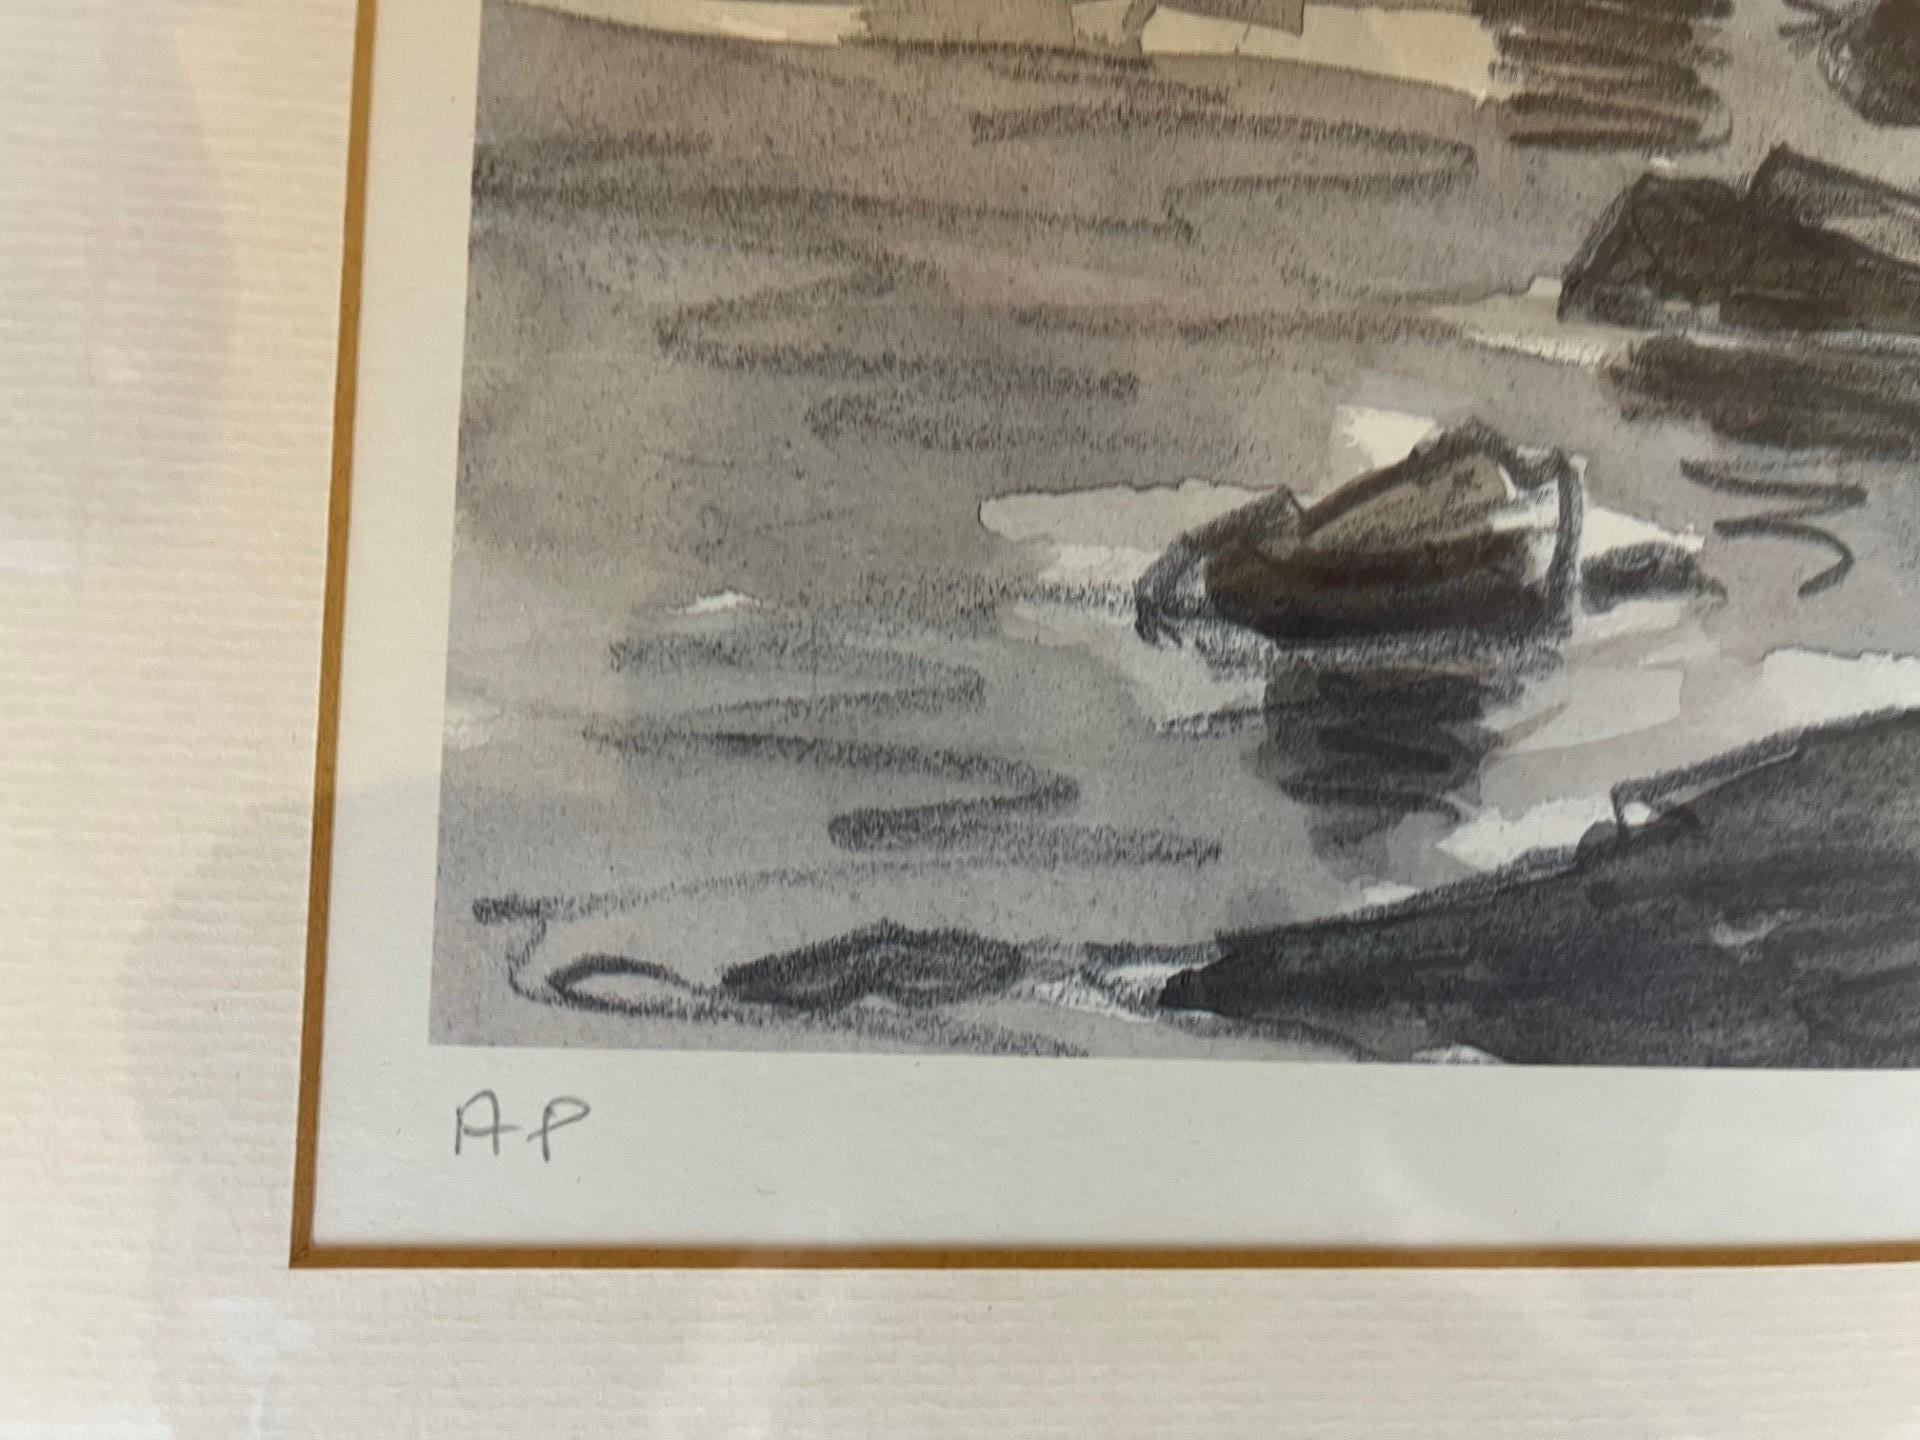 kyffin williams signed prints for sale